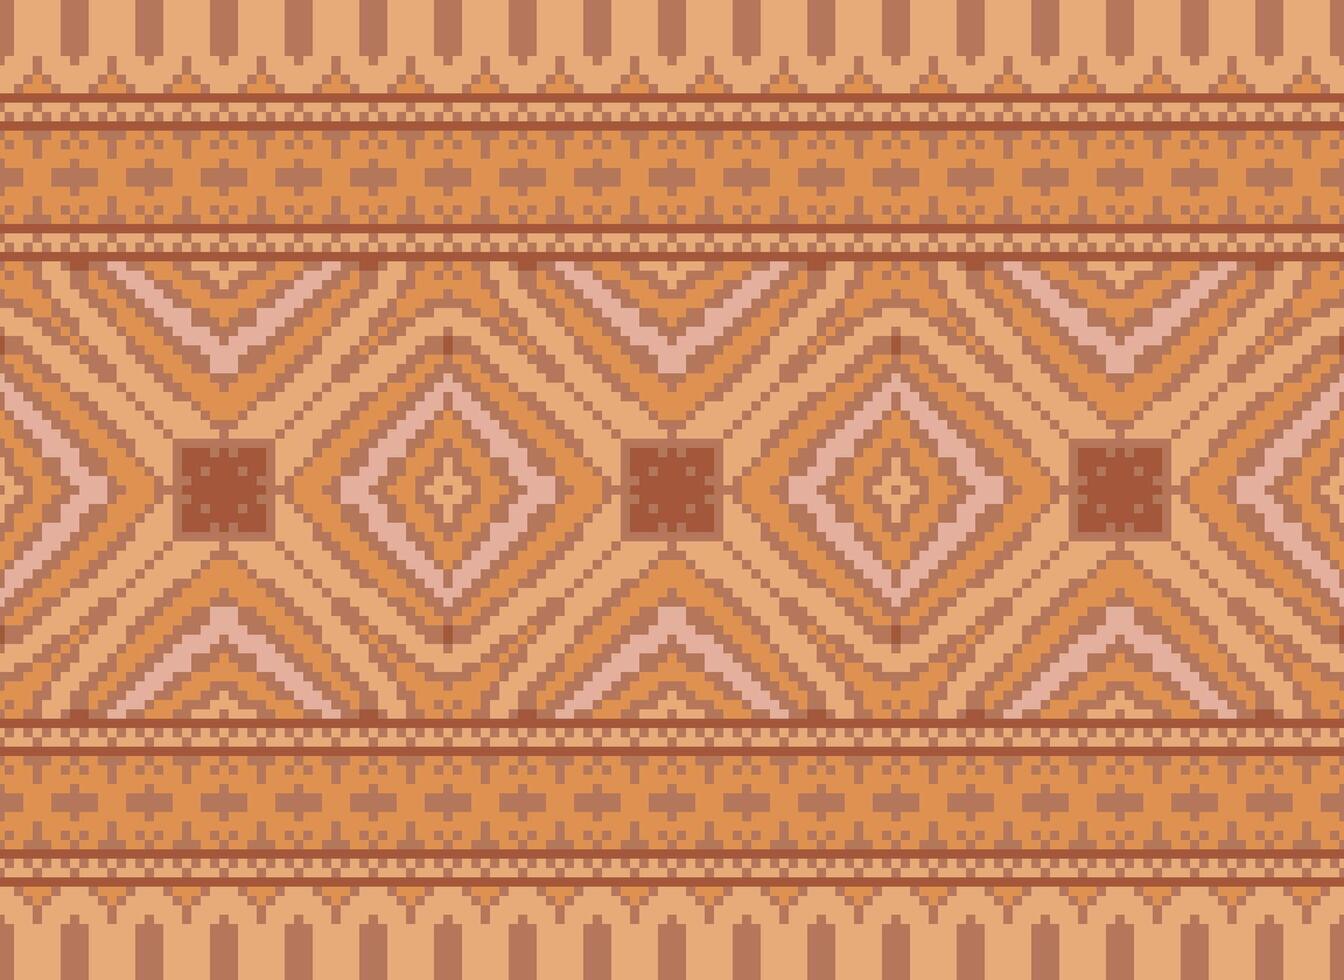 Pixel Cross Stitch Embroidery. Ethnic Patterns. Native Style. Traditional Design for texture, textile, fabric, clothing, Knitwear, print. Geometric Pixel Horizontal Seamless Vector. vector